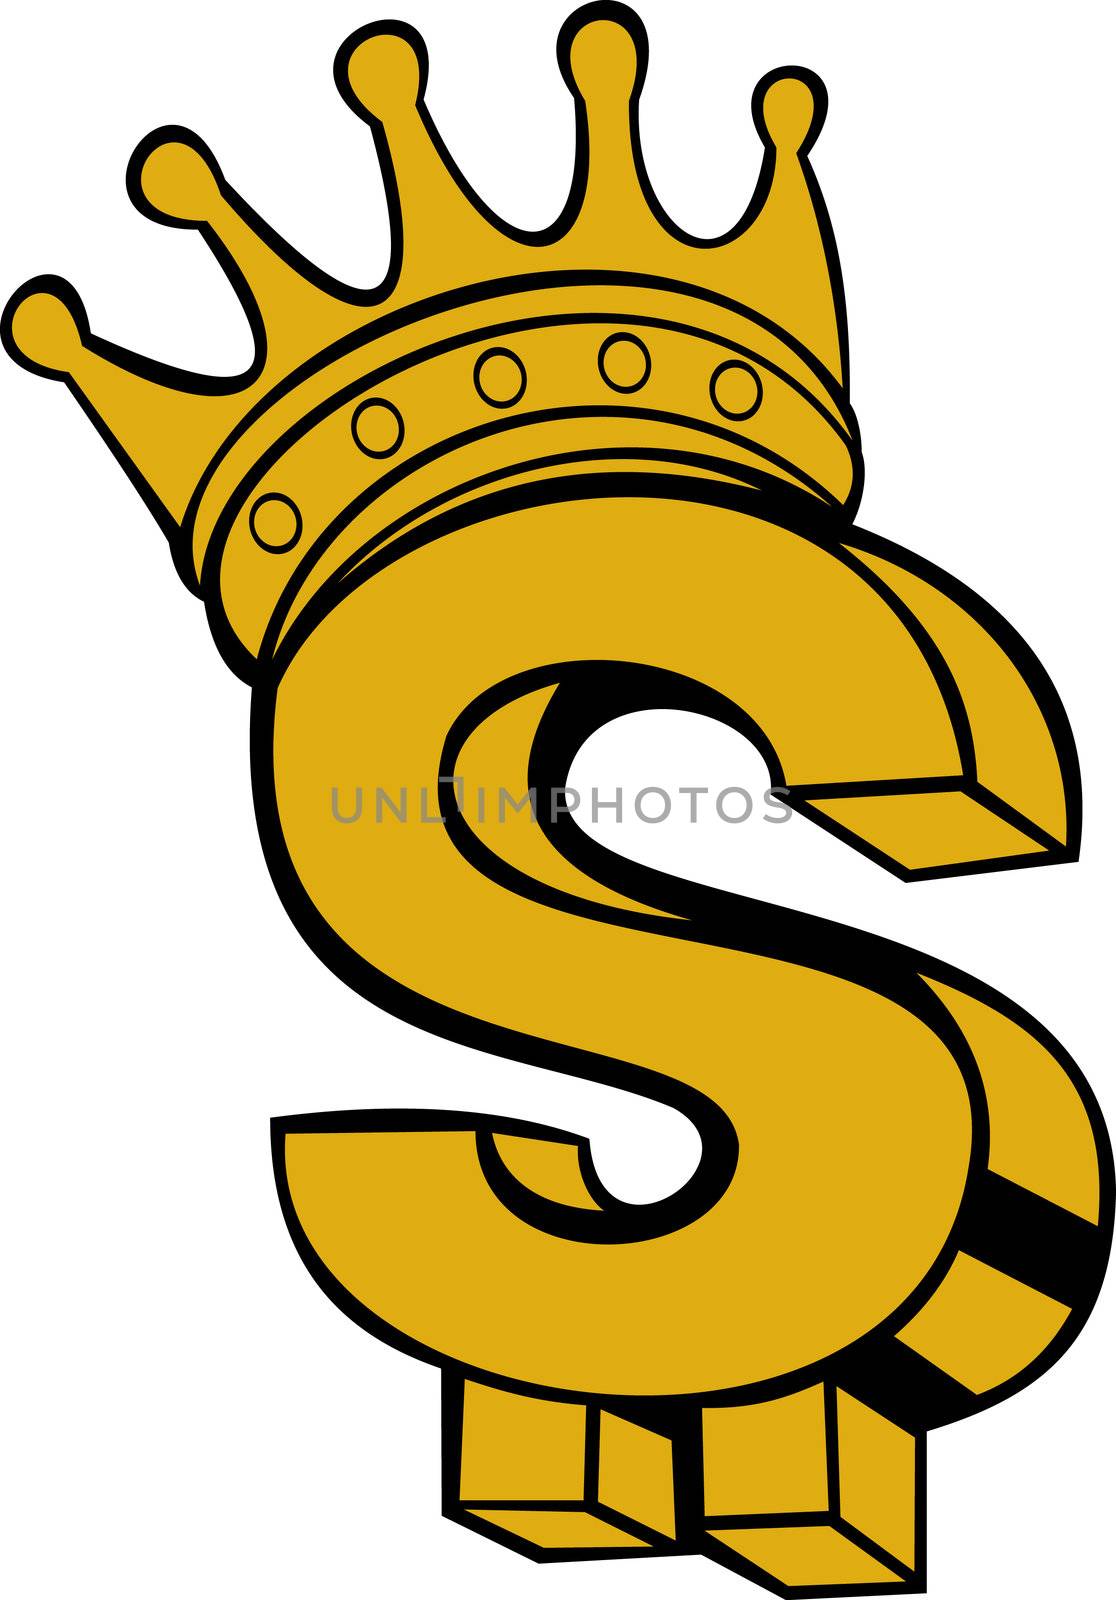 illustration of a gold dollar sign with crown isolated on white